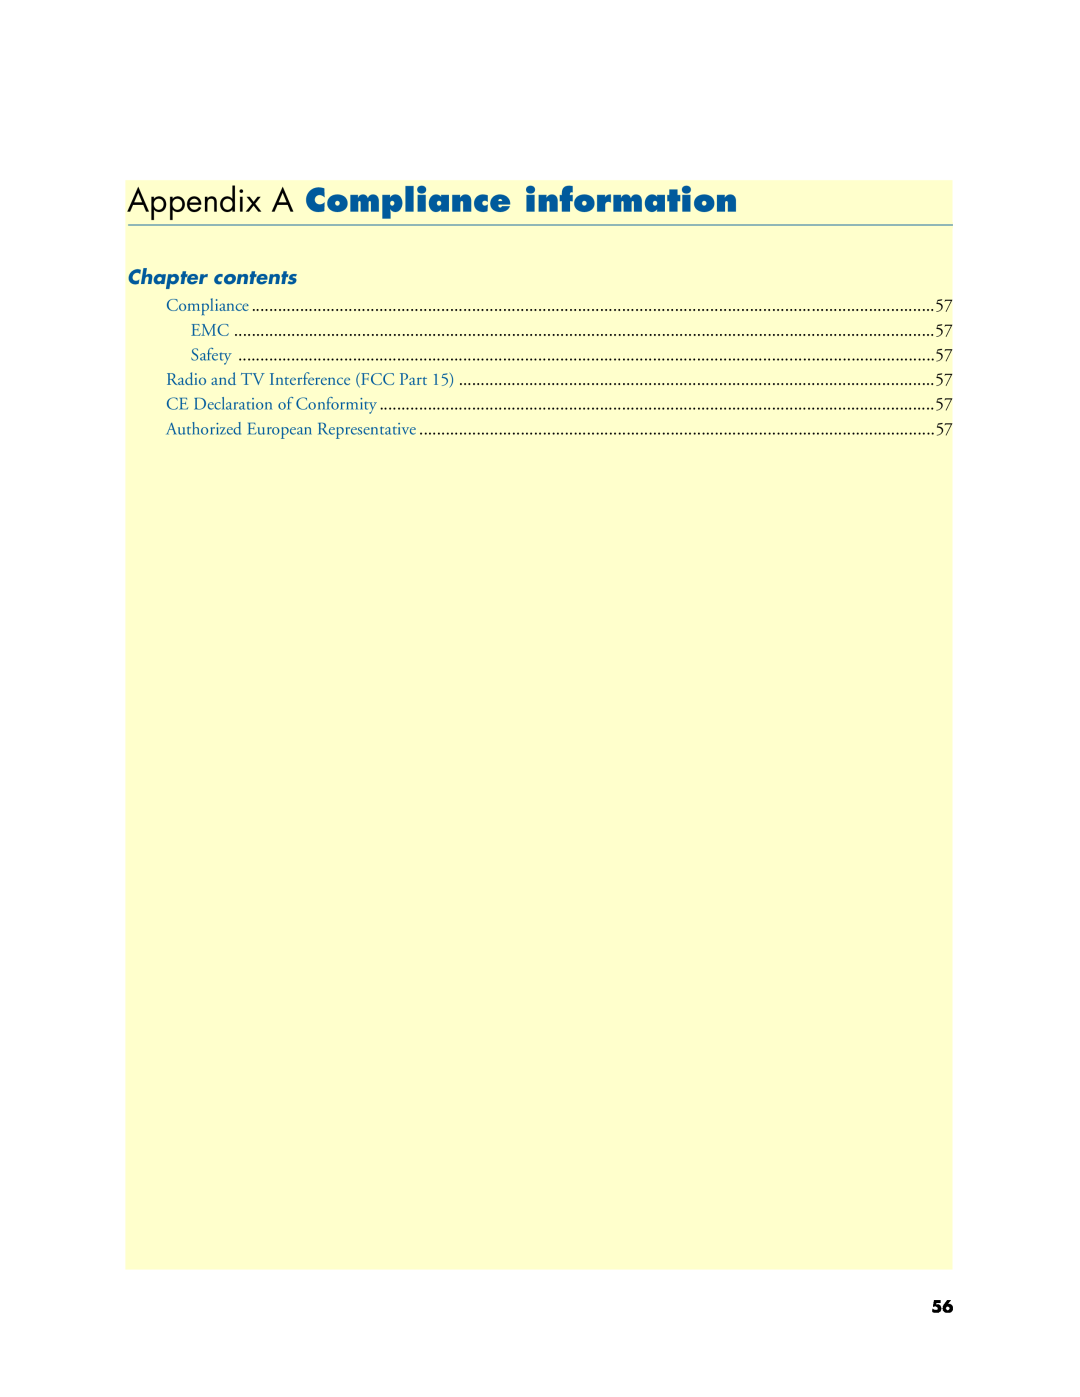 Patton electronic 3088A manual Appendix A Compliance information, Chapter contents 